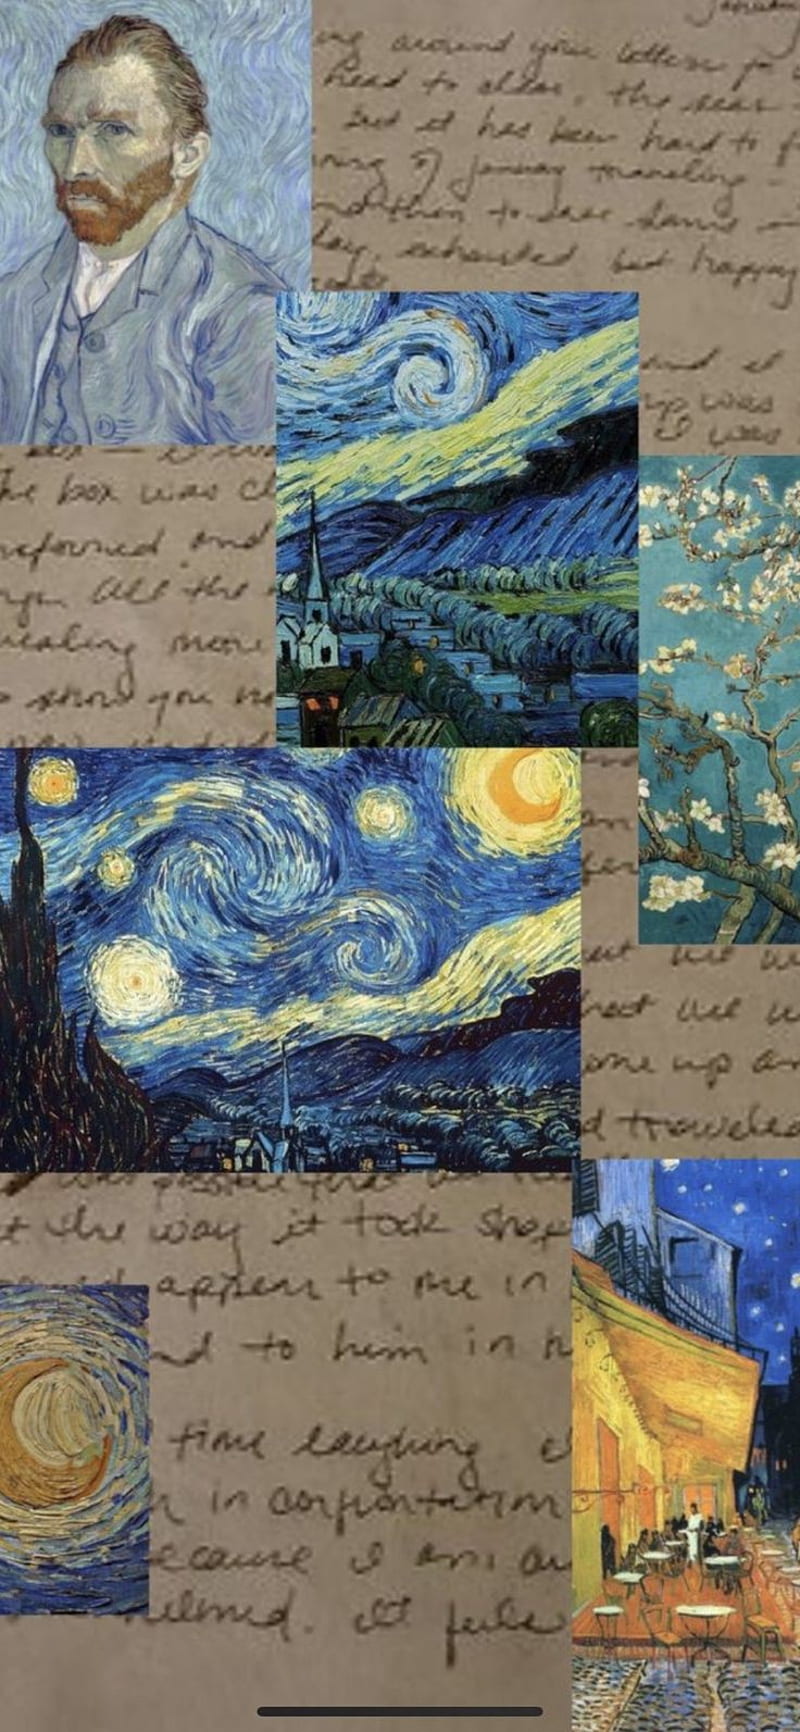 Van Gogh iPhone wallpaper, Landscape HD background | free image by  rawpixel.com / National Gallery of Art (… | Van gogh landscapes, Van gogh  art, Van gogh wallpaper